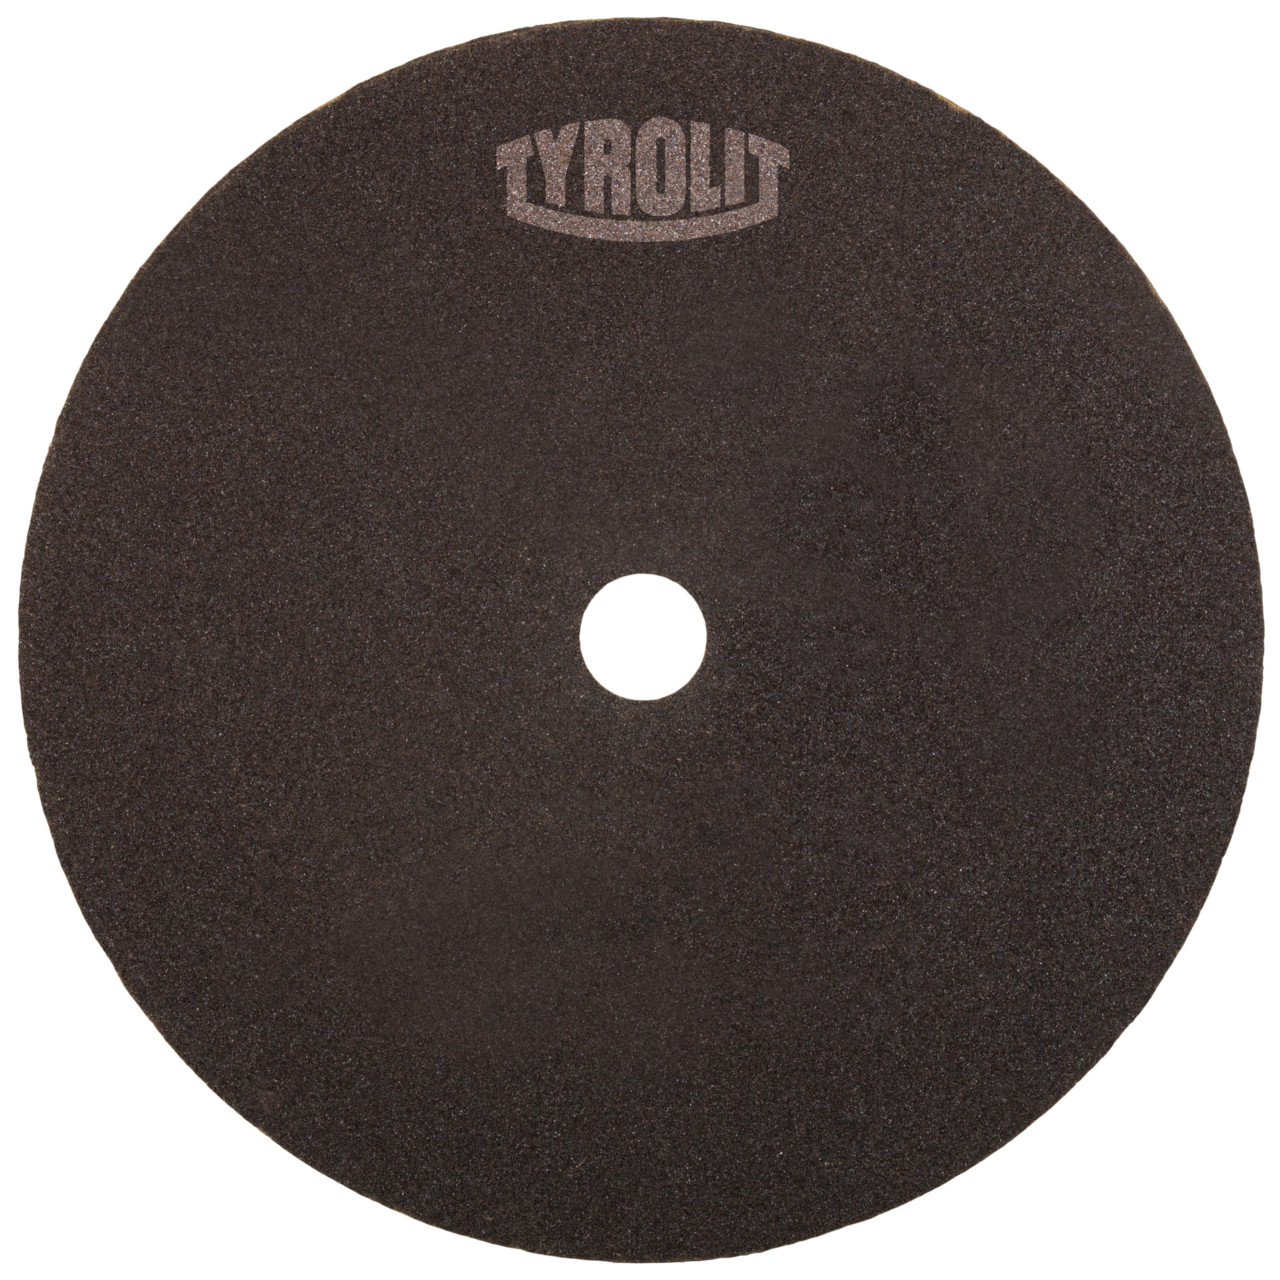 TYROLIT cut-off wheel for cutting and saw sharpening DxDxH 150x1.5x20 For steel and HSS, shape: 41N - straight version (non-woven cut-off wheel), Art. 282085